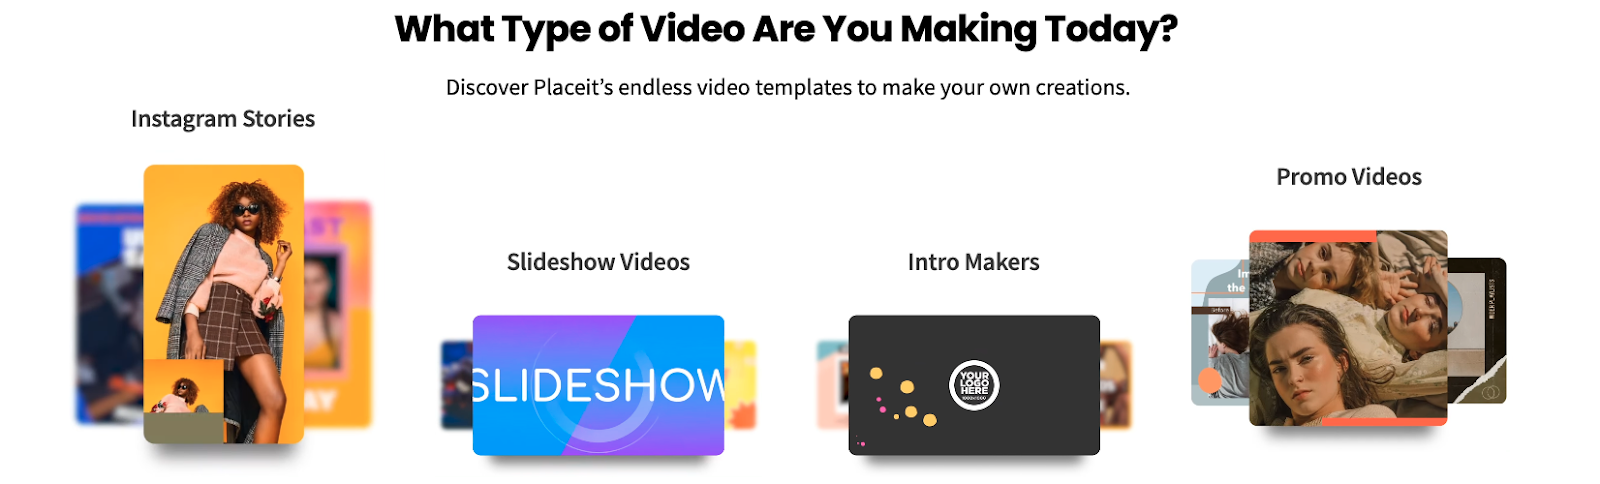 Placeit's video creation tools: Instagram Stories, Slideshows, Intros, Promo videos.